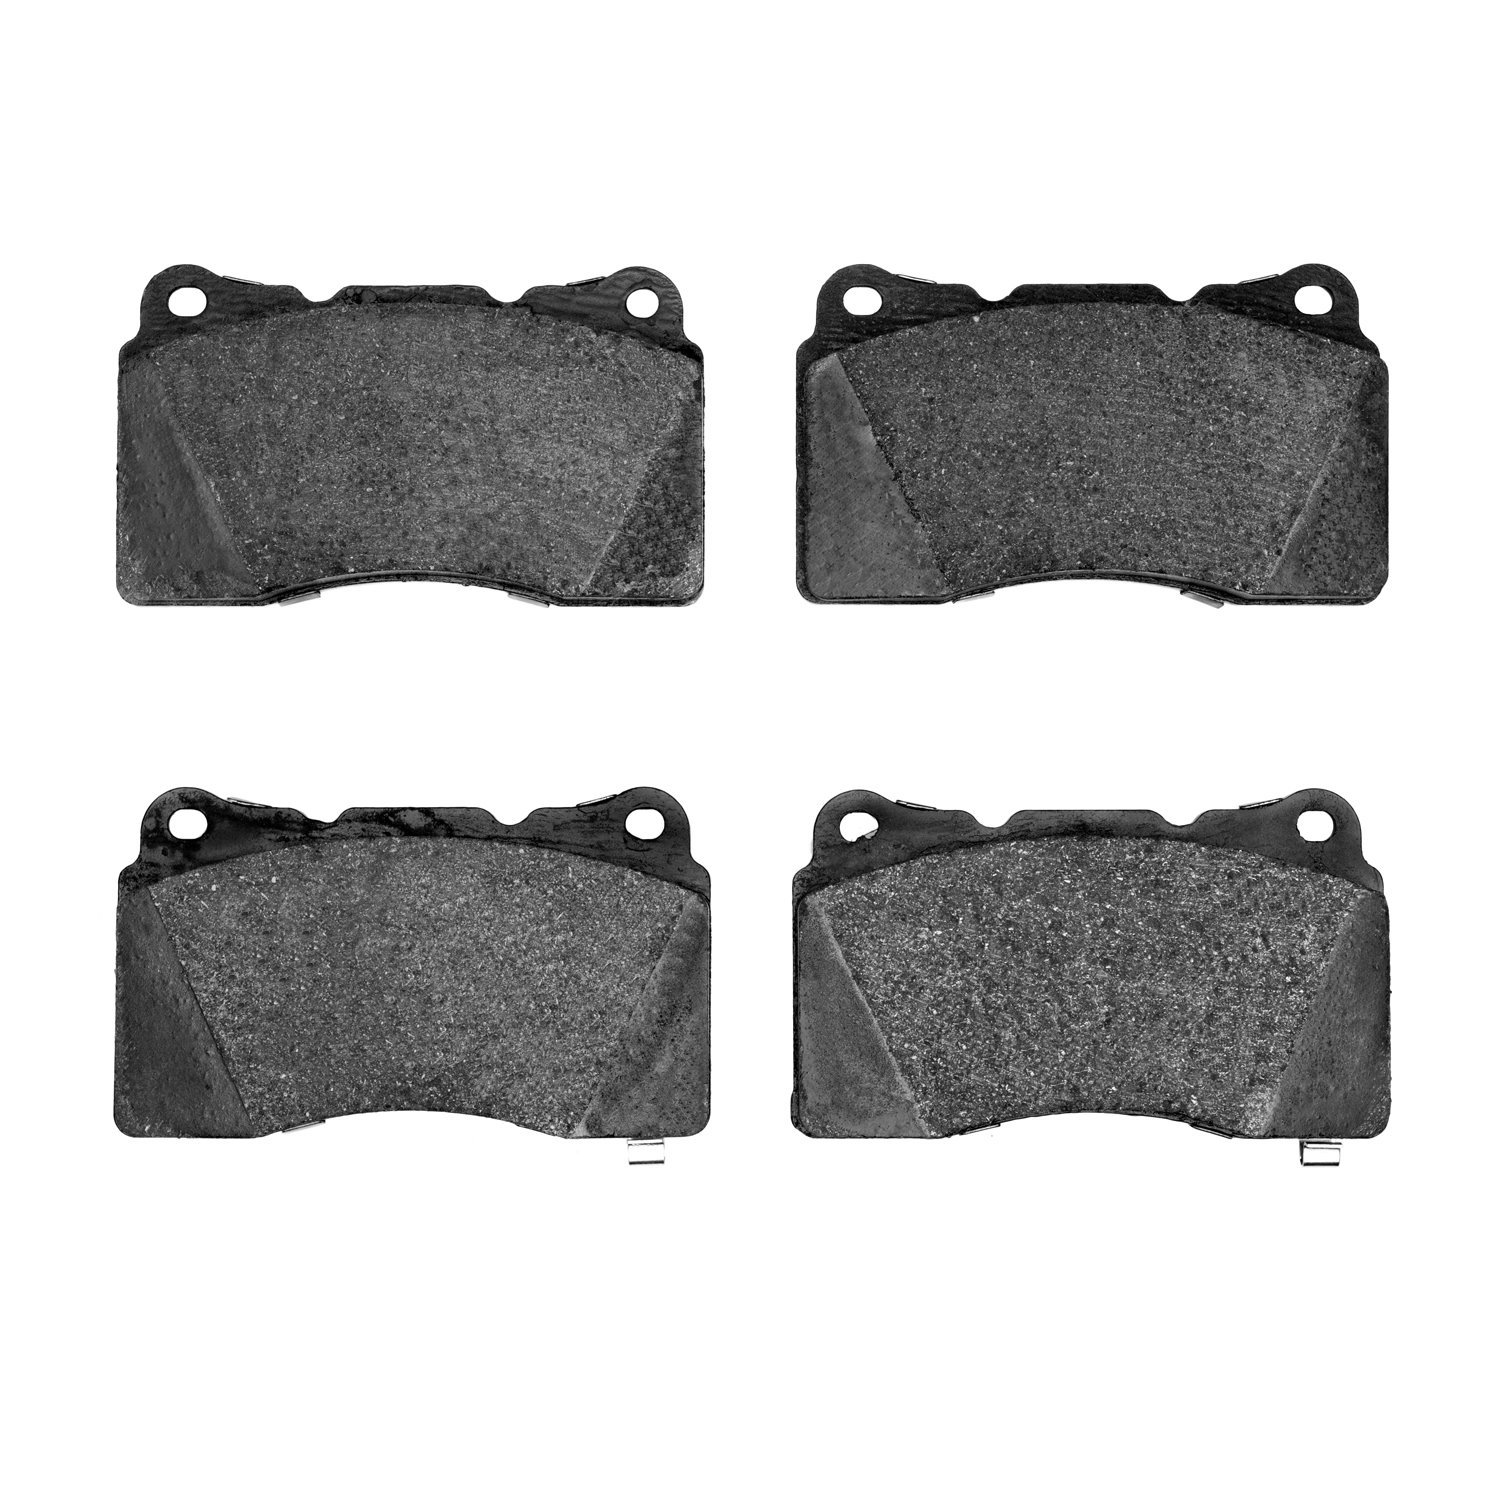 1551-1001-00 5000 Advanced Low-Metallic Brake Pads, 2003-2021 Multiple Makes/Models, Position: Rear,Front